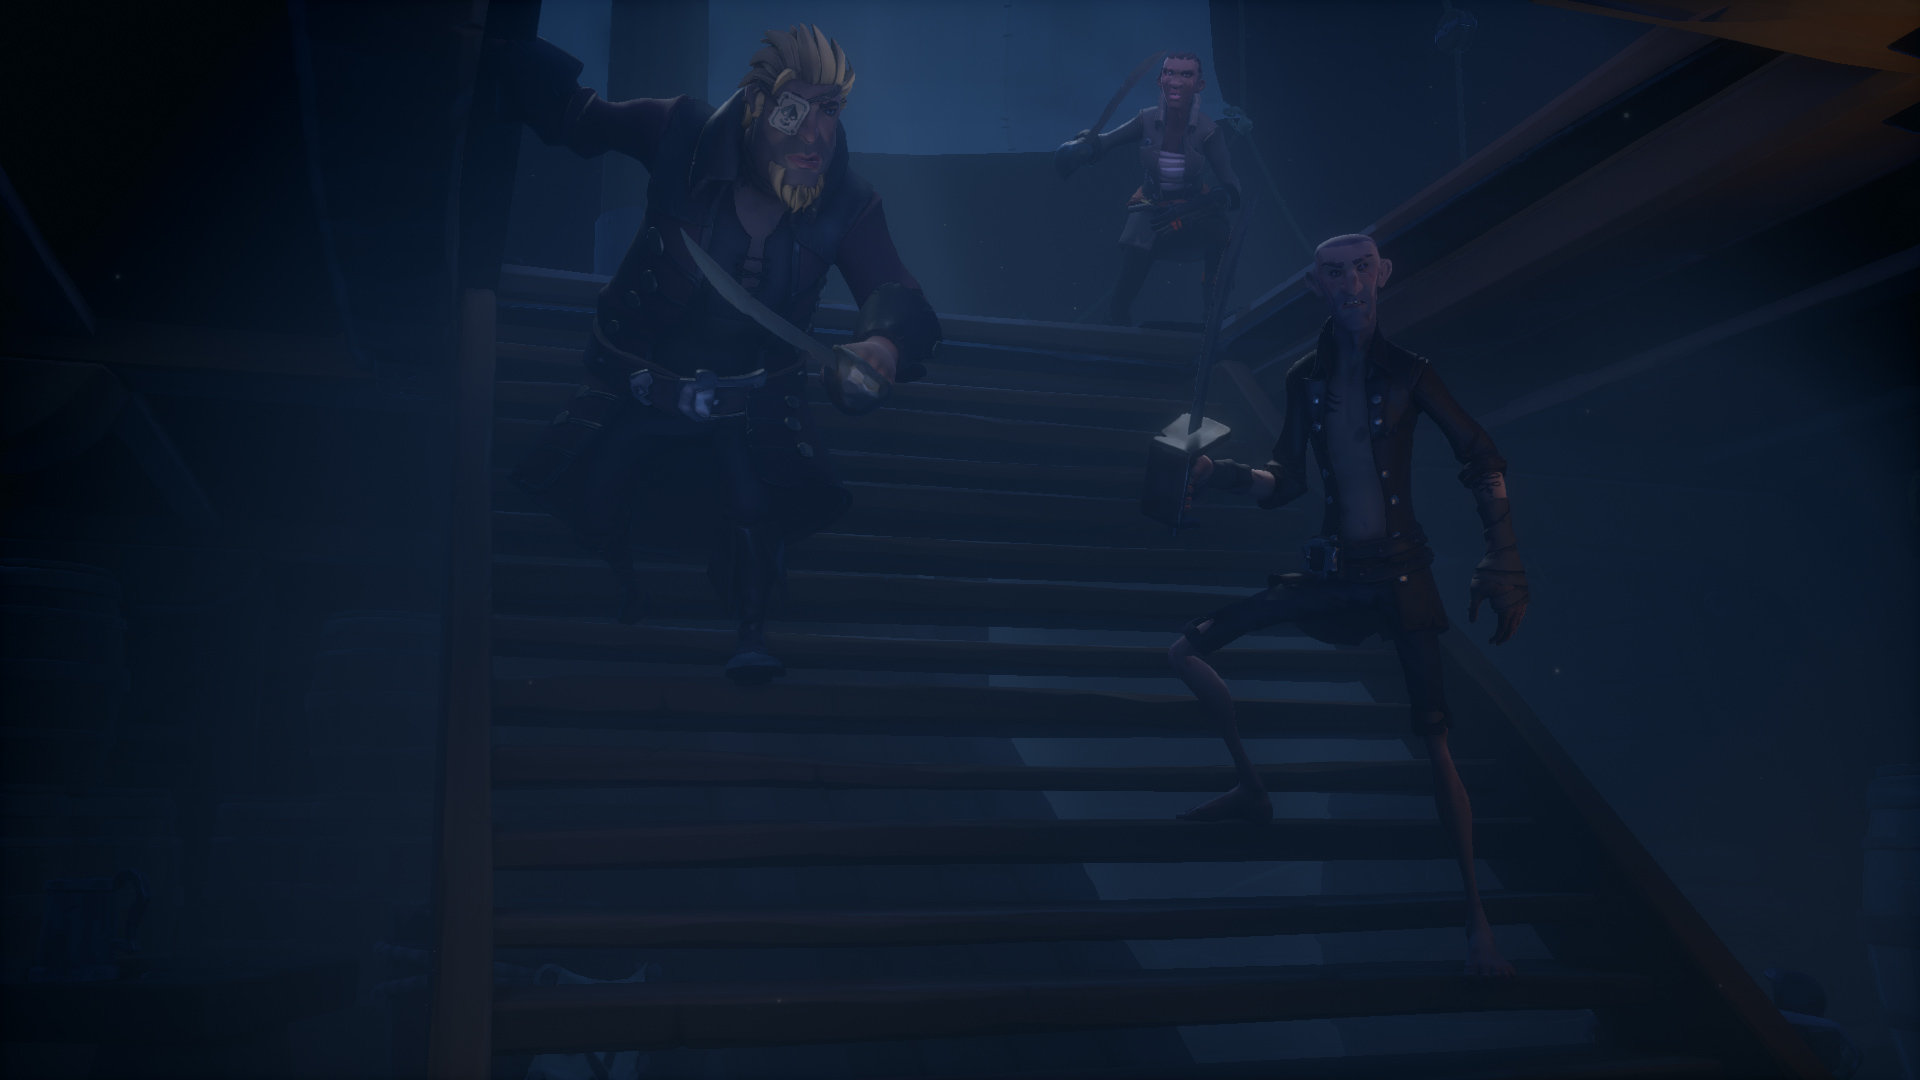 Acted as Principal Artist:  created all lighting, animation, cinematography, VFX, using Rare's base assets for their upcoming game Sea of Thieves. Created in Unreal Engine 4.